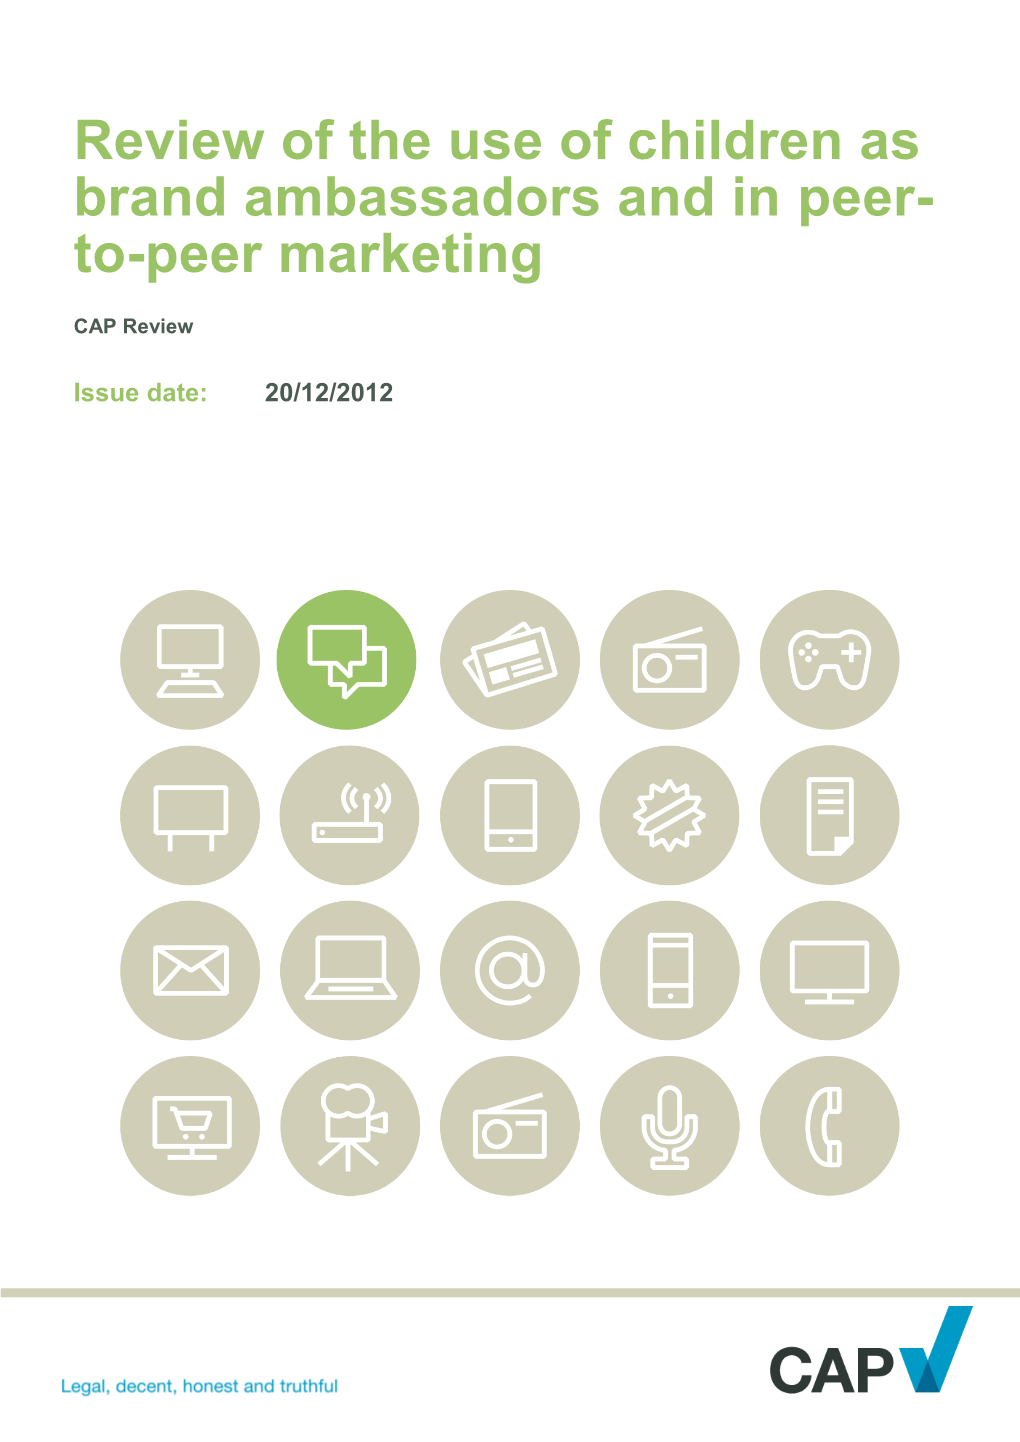 Review of the Use of Children As Brand Ambassadors and in Peer-To-Peer Marketing 4 Background